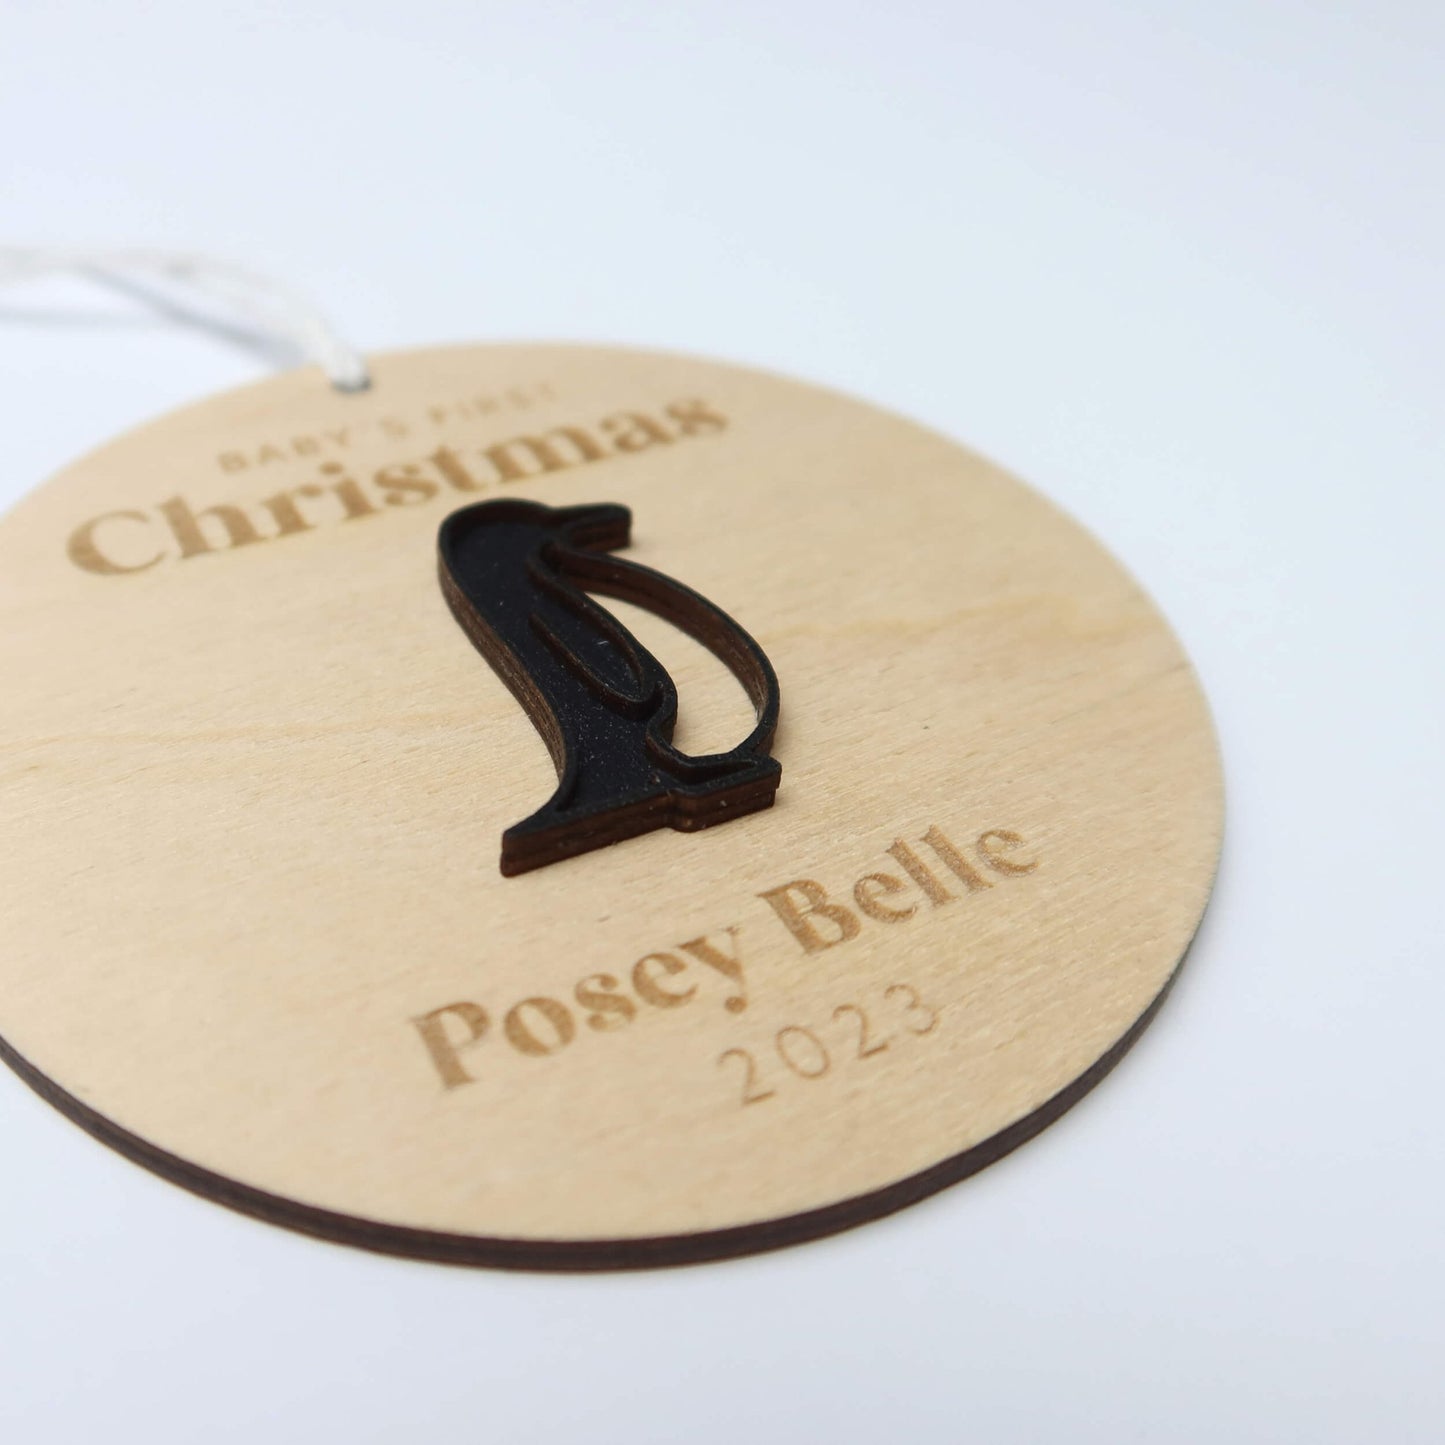 Penguin Baby's First Christmas Ornament Personalized - Holiday Ornaments - Moon Rock Prints